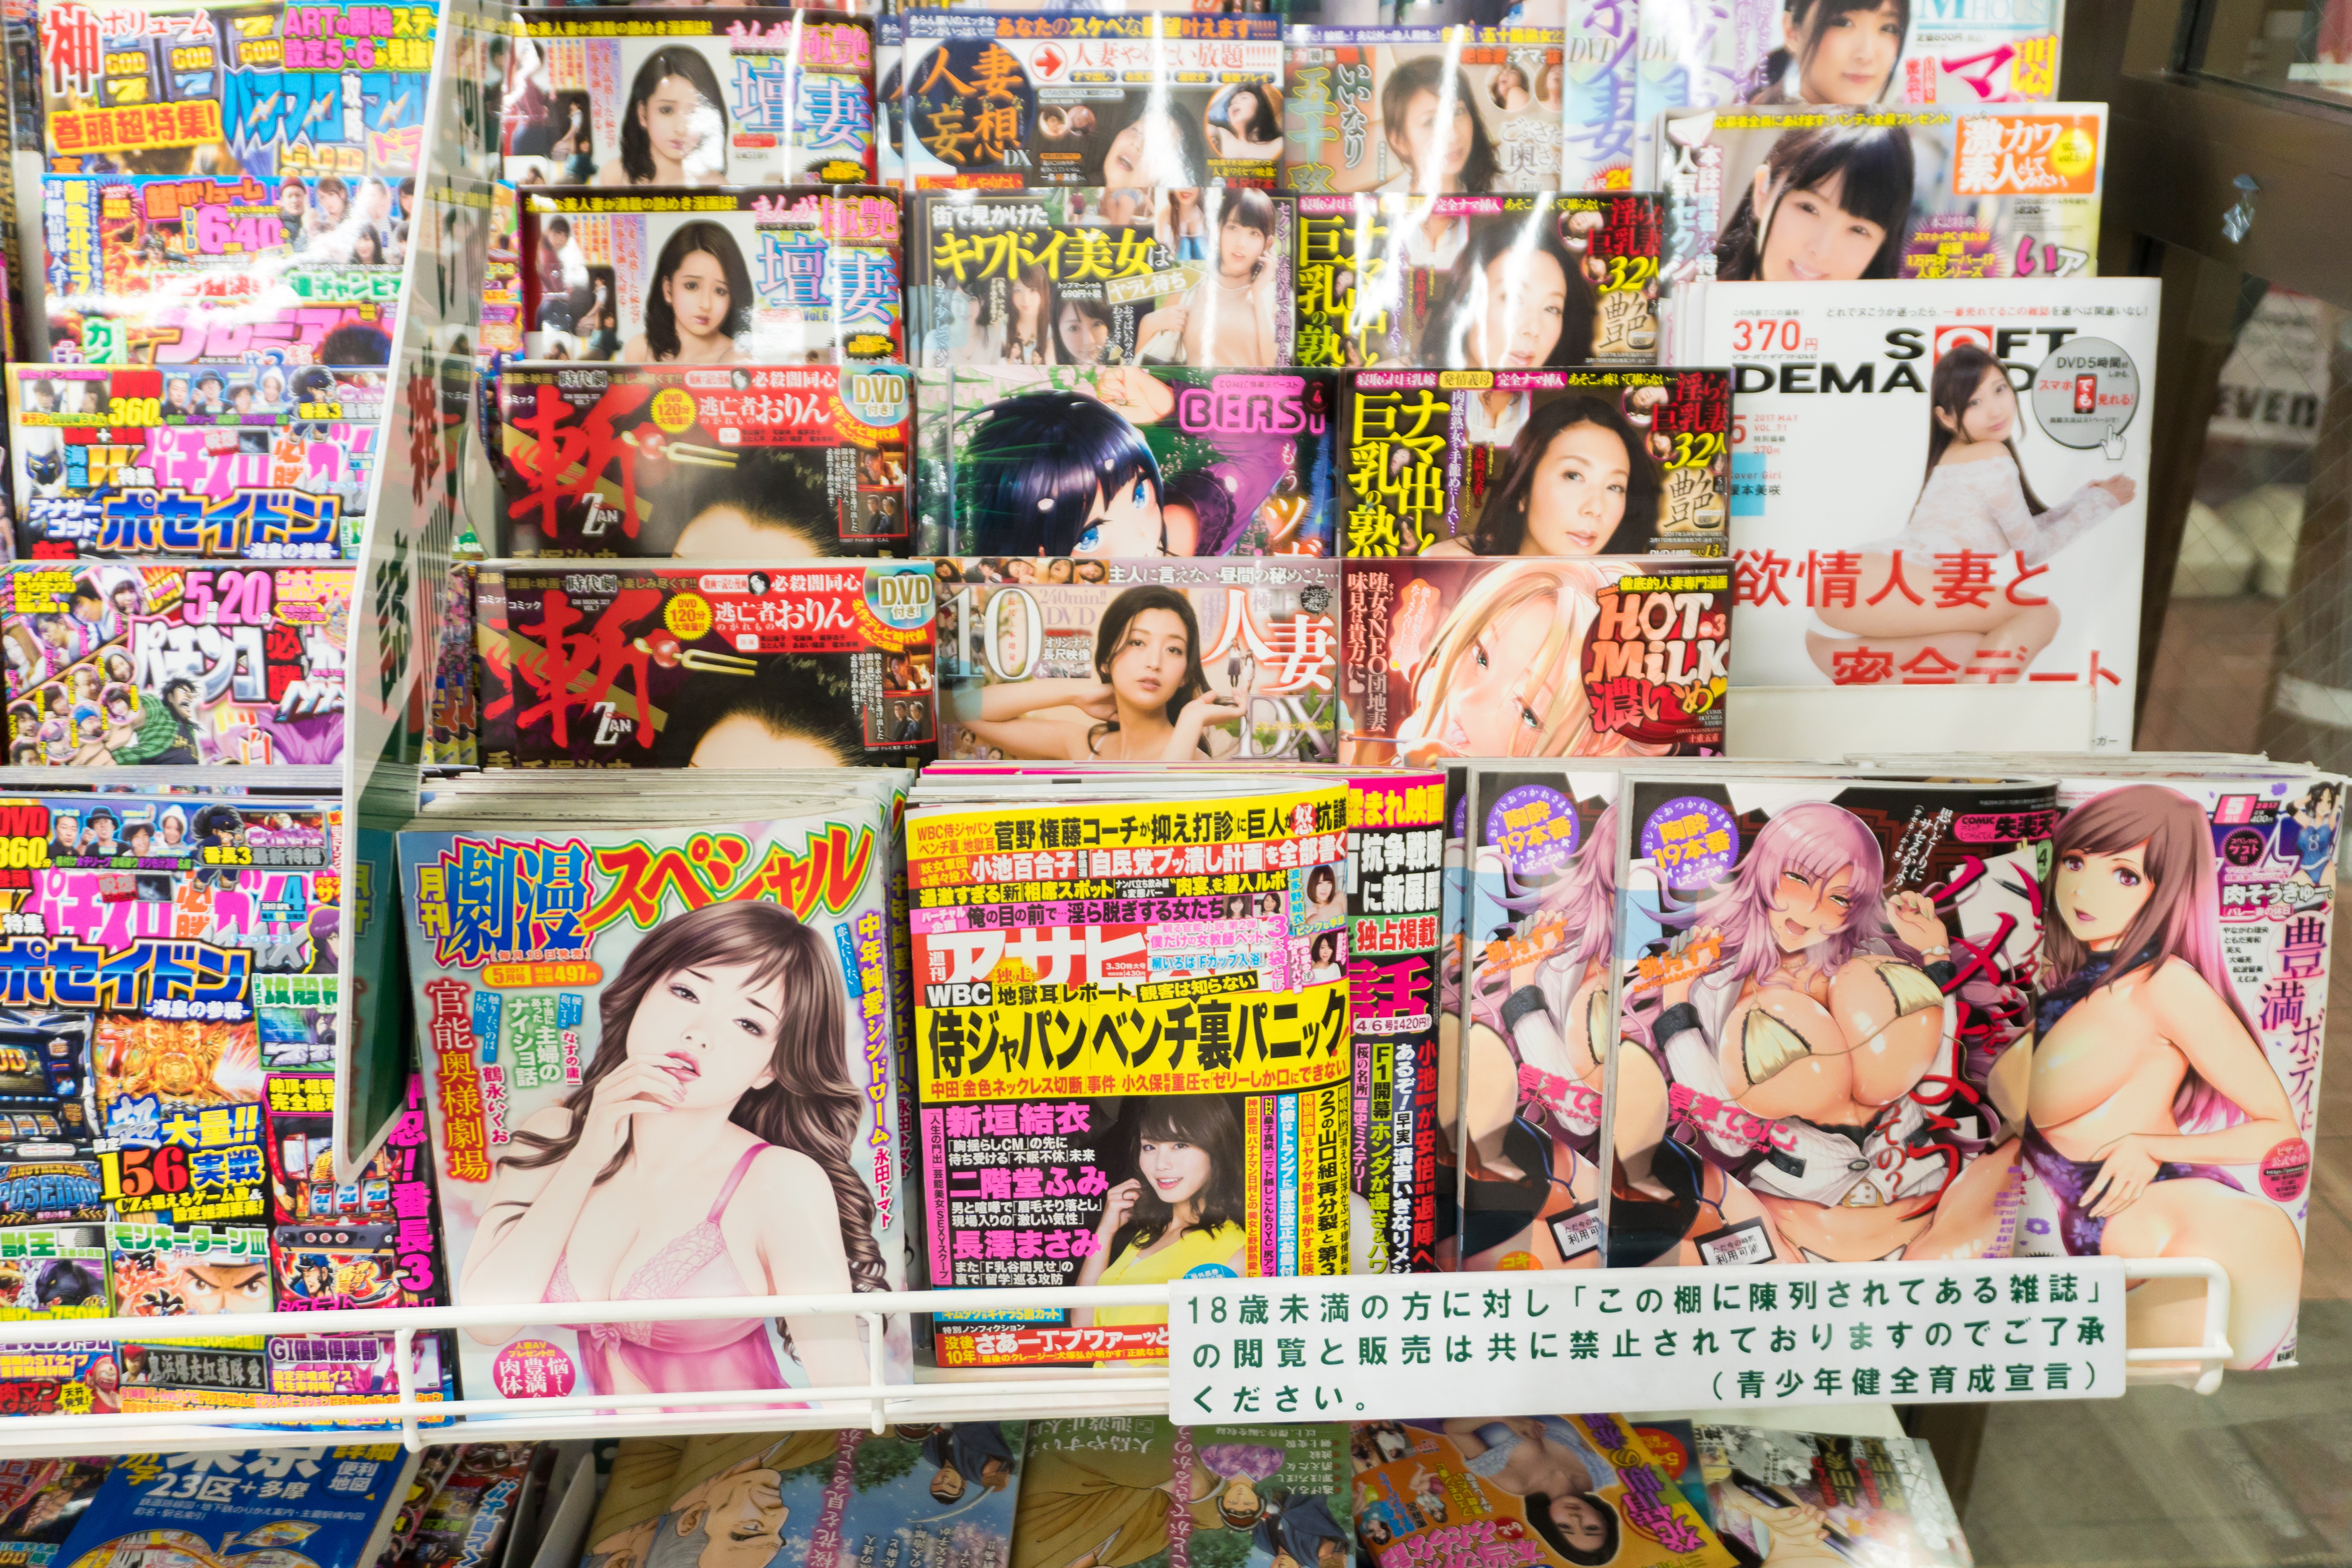 Japan Porno Magazine - Opinion: Porn free: Japan to take adult magazines off convenience-store  shelves ahead of Tokyo Olympics | South China Morning Post